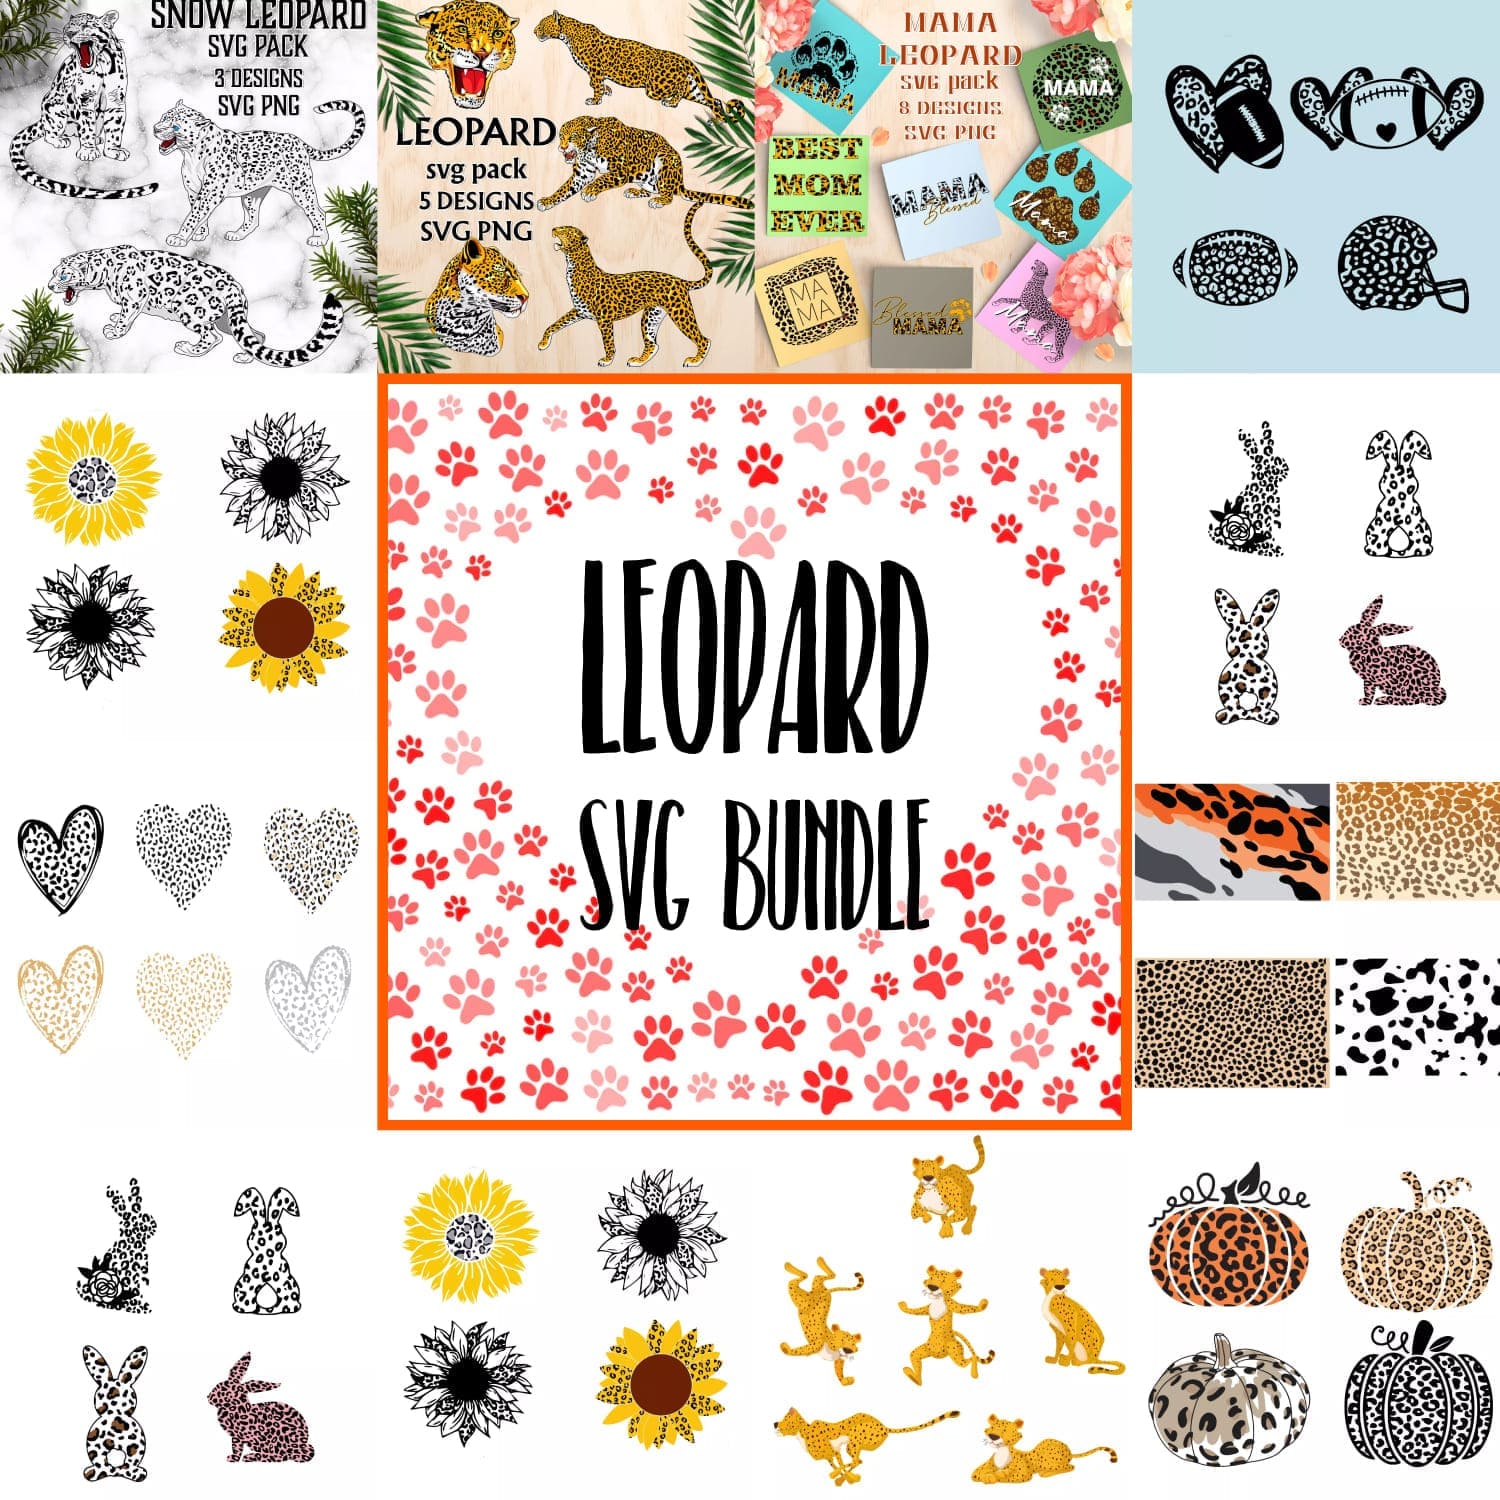 The leopard svg bundle includes a variety of animal designs.